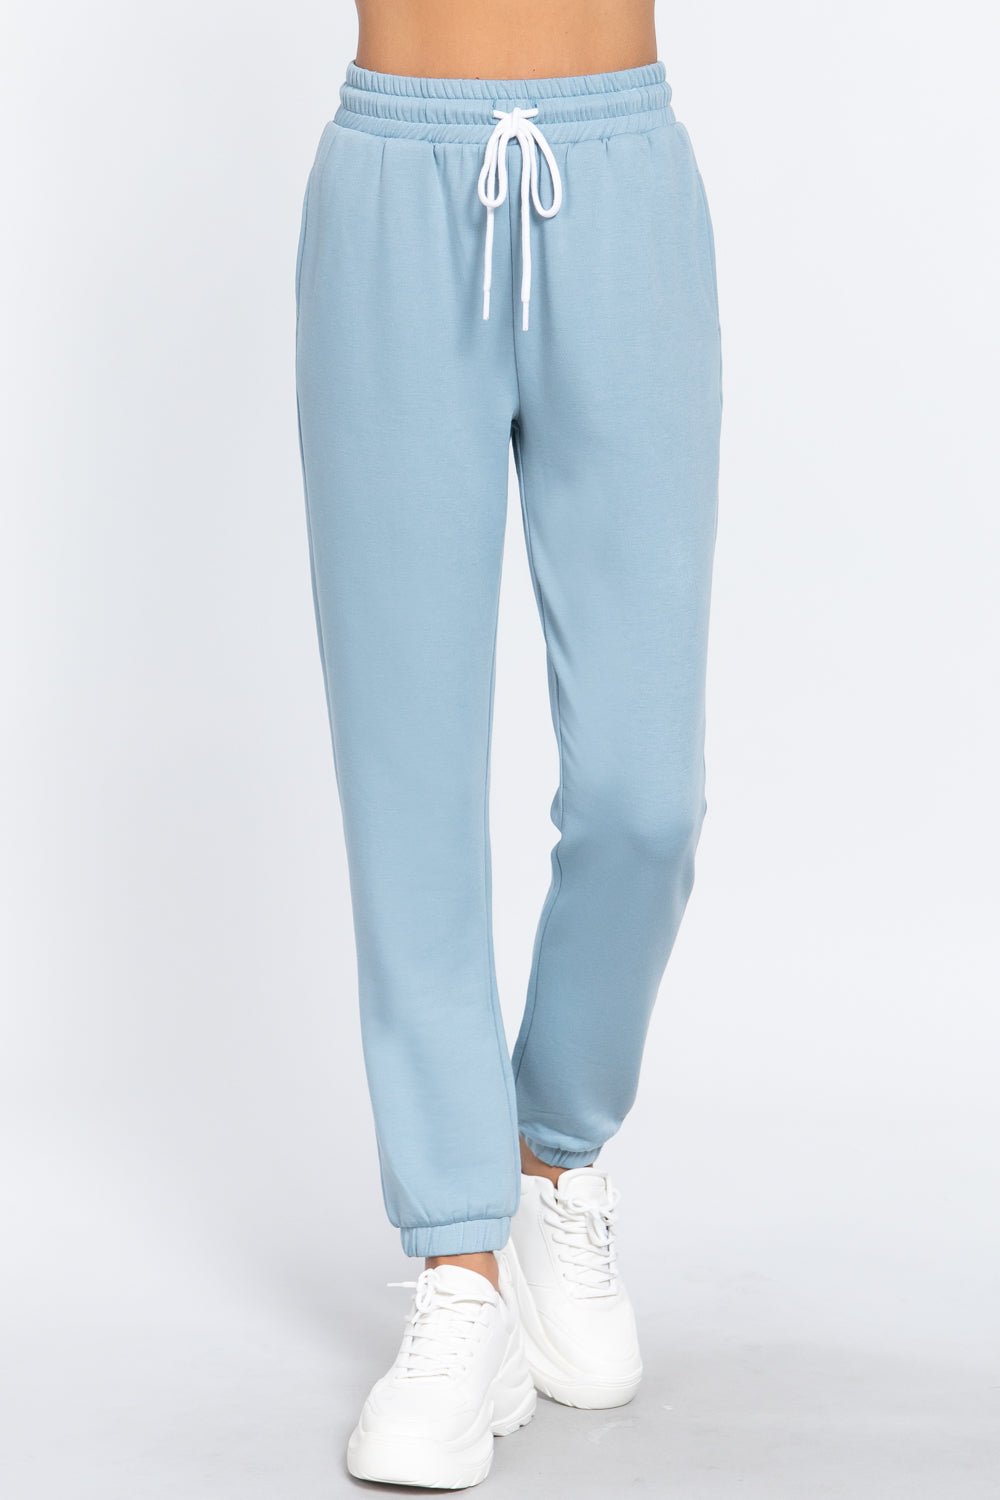 Our Best Polyester/Rayon Blend Fleece French Terry Drawstring Waistband Jogger Pants (Paint Blue)